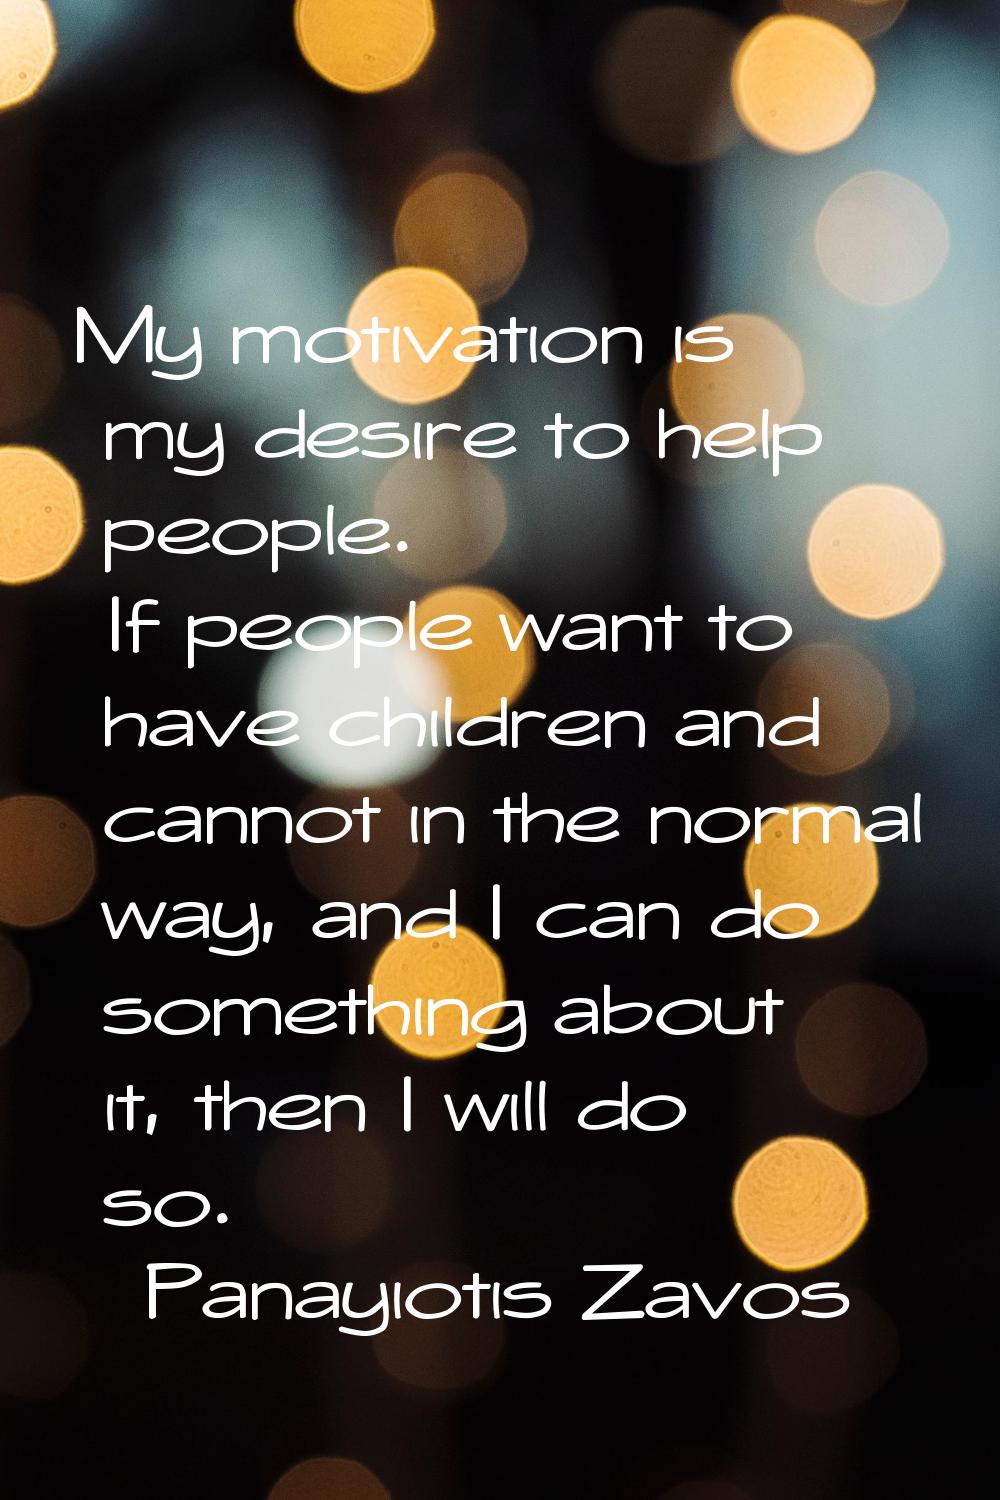 My motivation is my desire to help people. If people want to have children and cannot in the normal